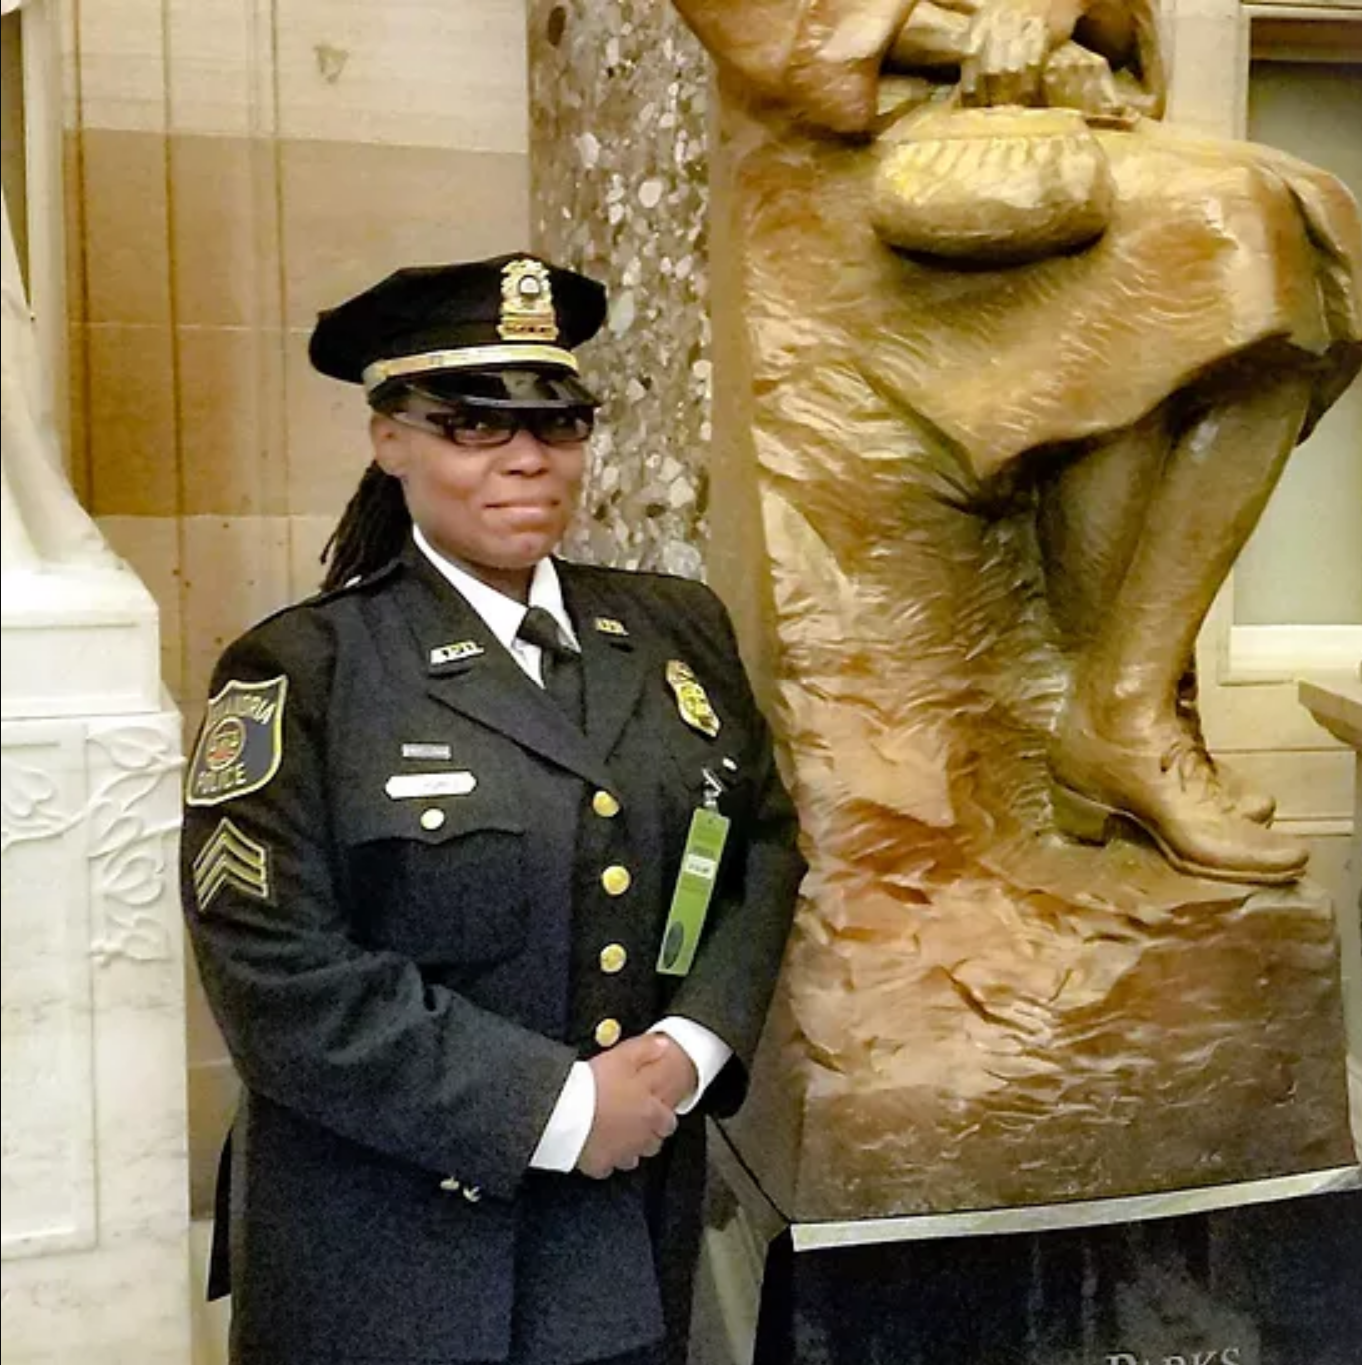 Hurley, wearing a dress uniform, poses beside a statue